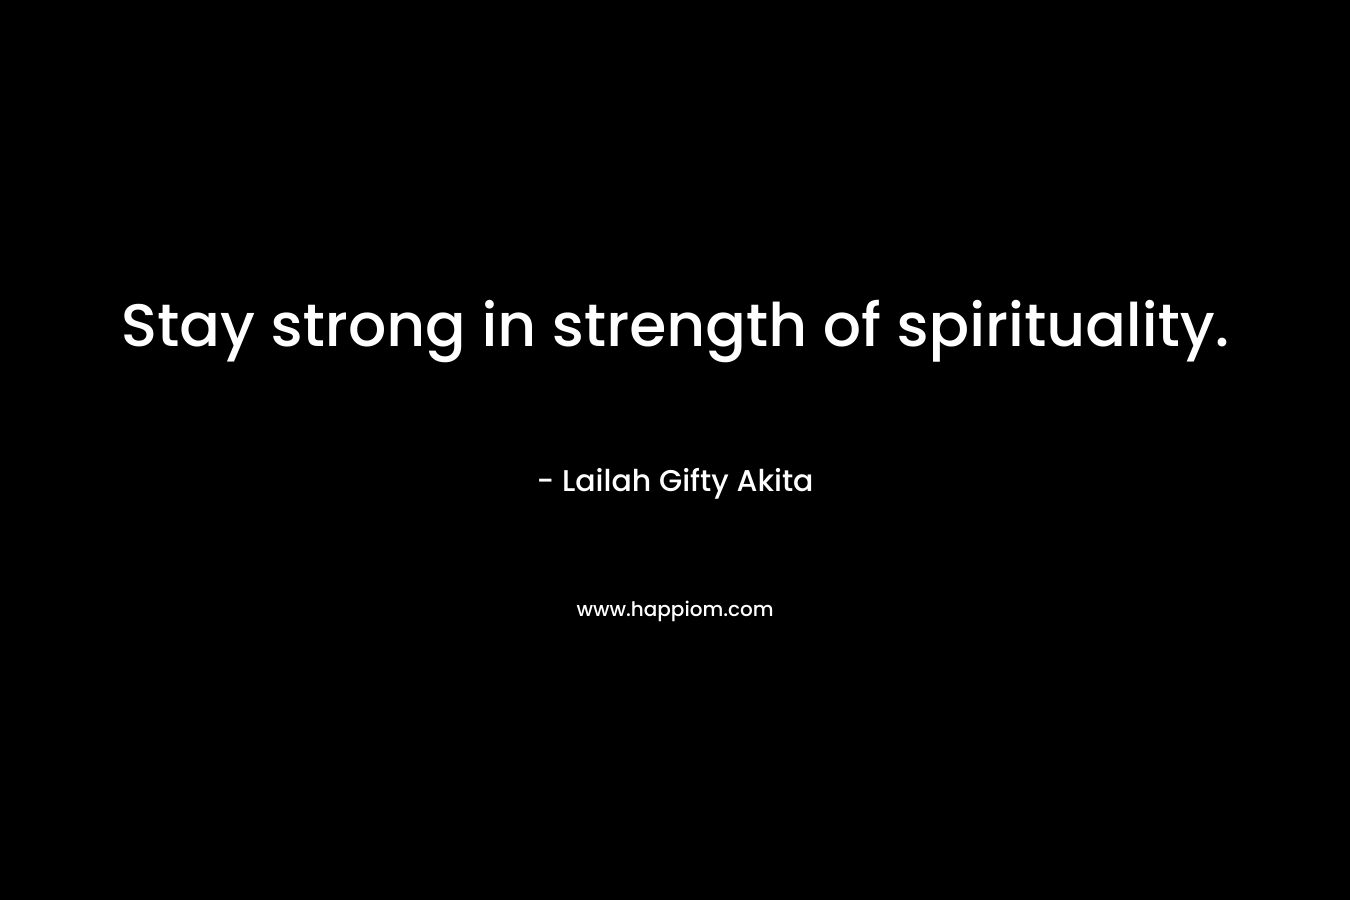 Stay strong in strength of spirituality.